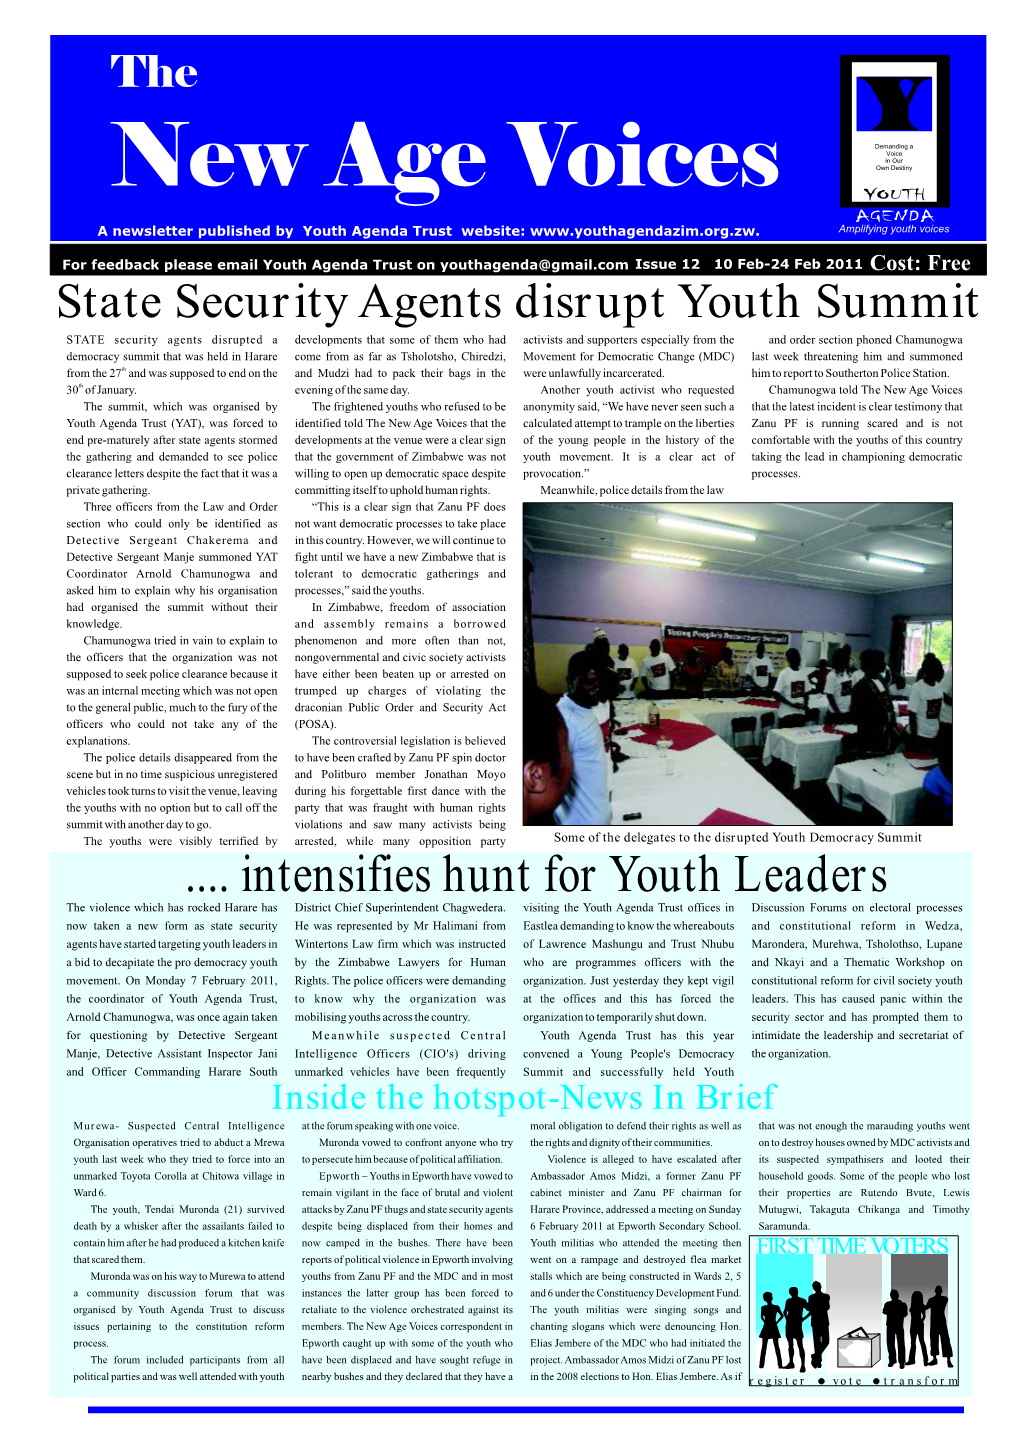 Intensifies Hunt for Youth Leaders